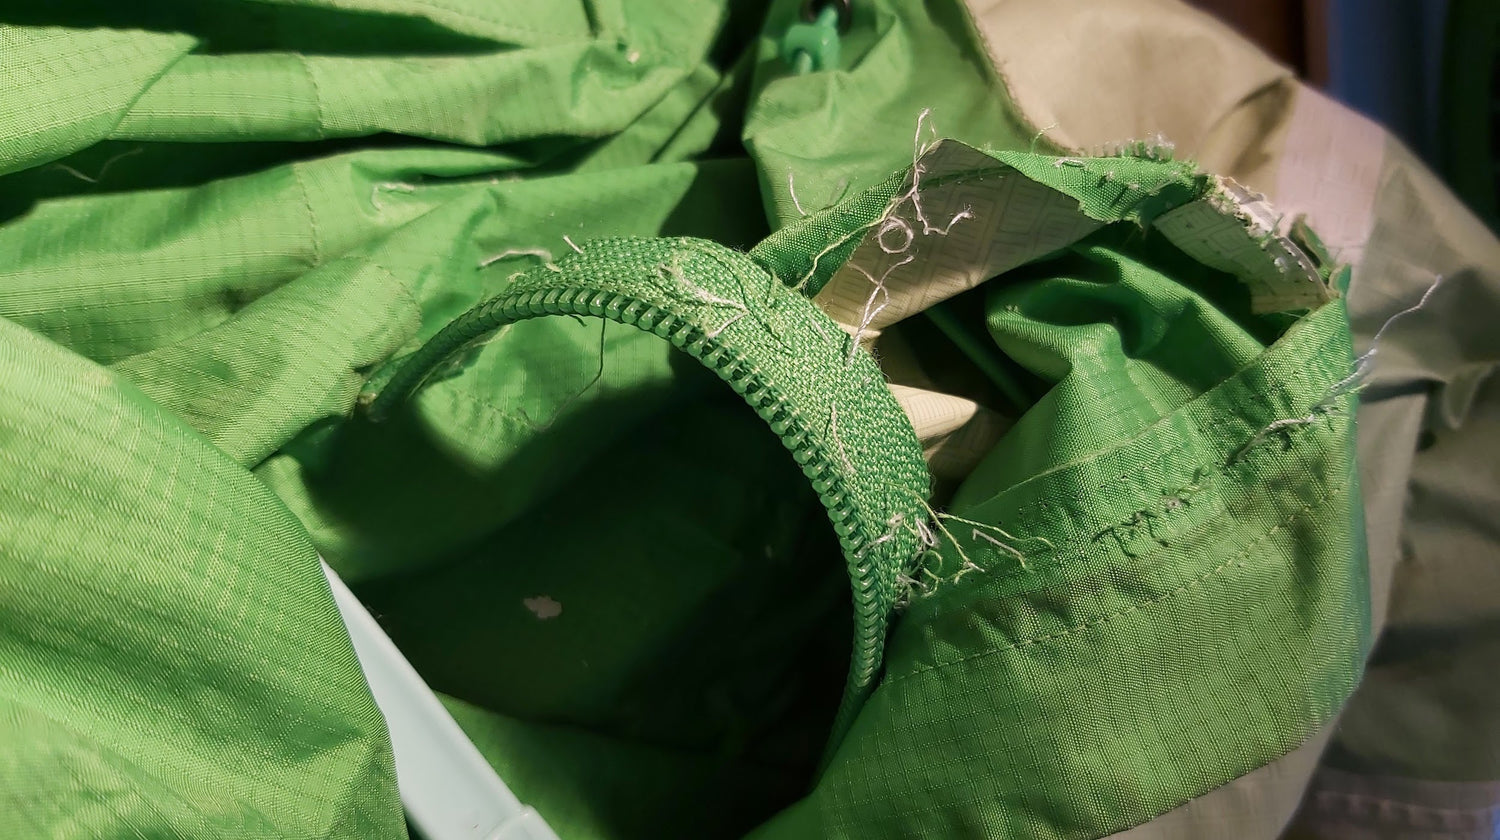 deconstructing the seams of a decommissioned Patagonia hiking jacket for usable fabric zippers and other hardware